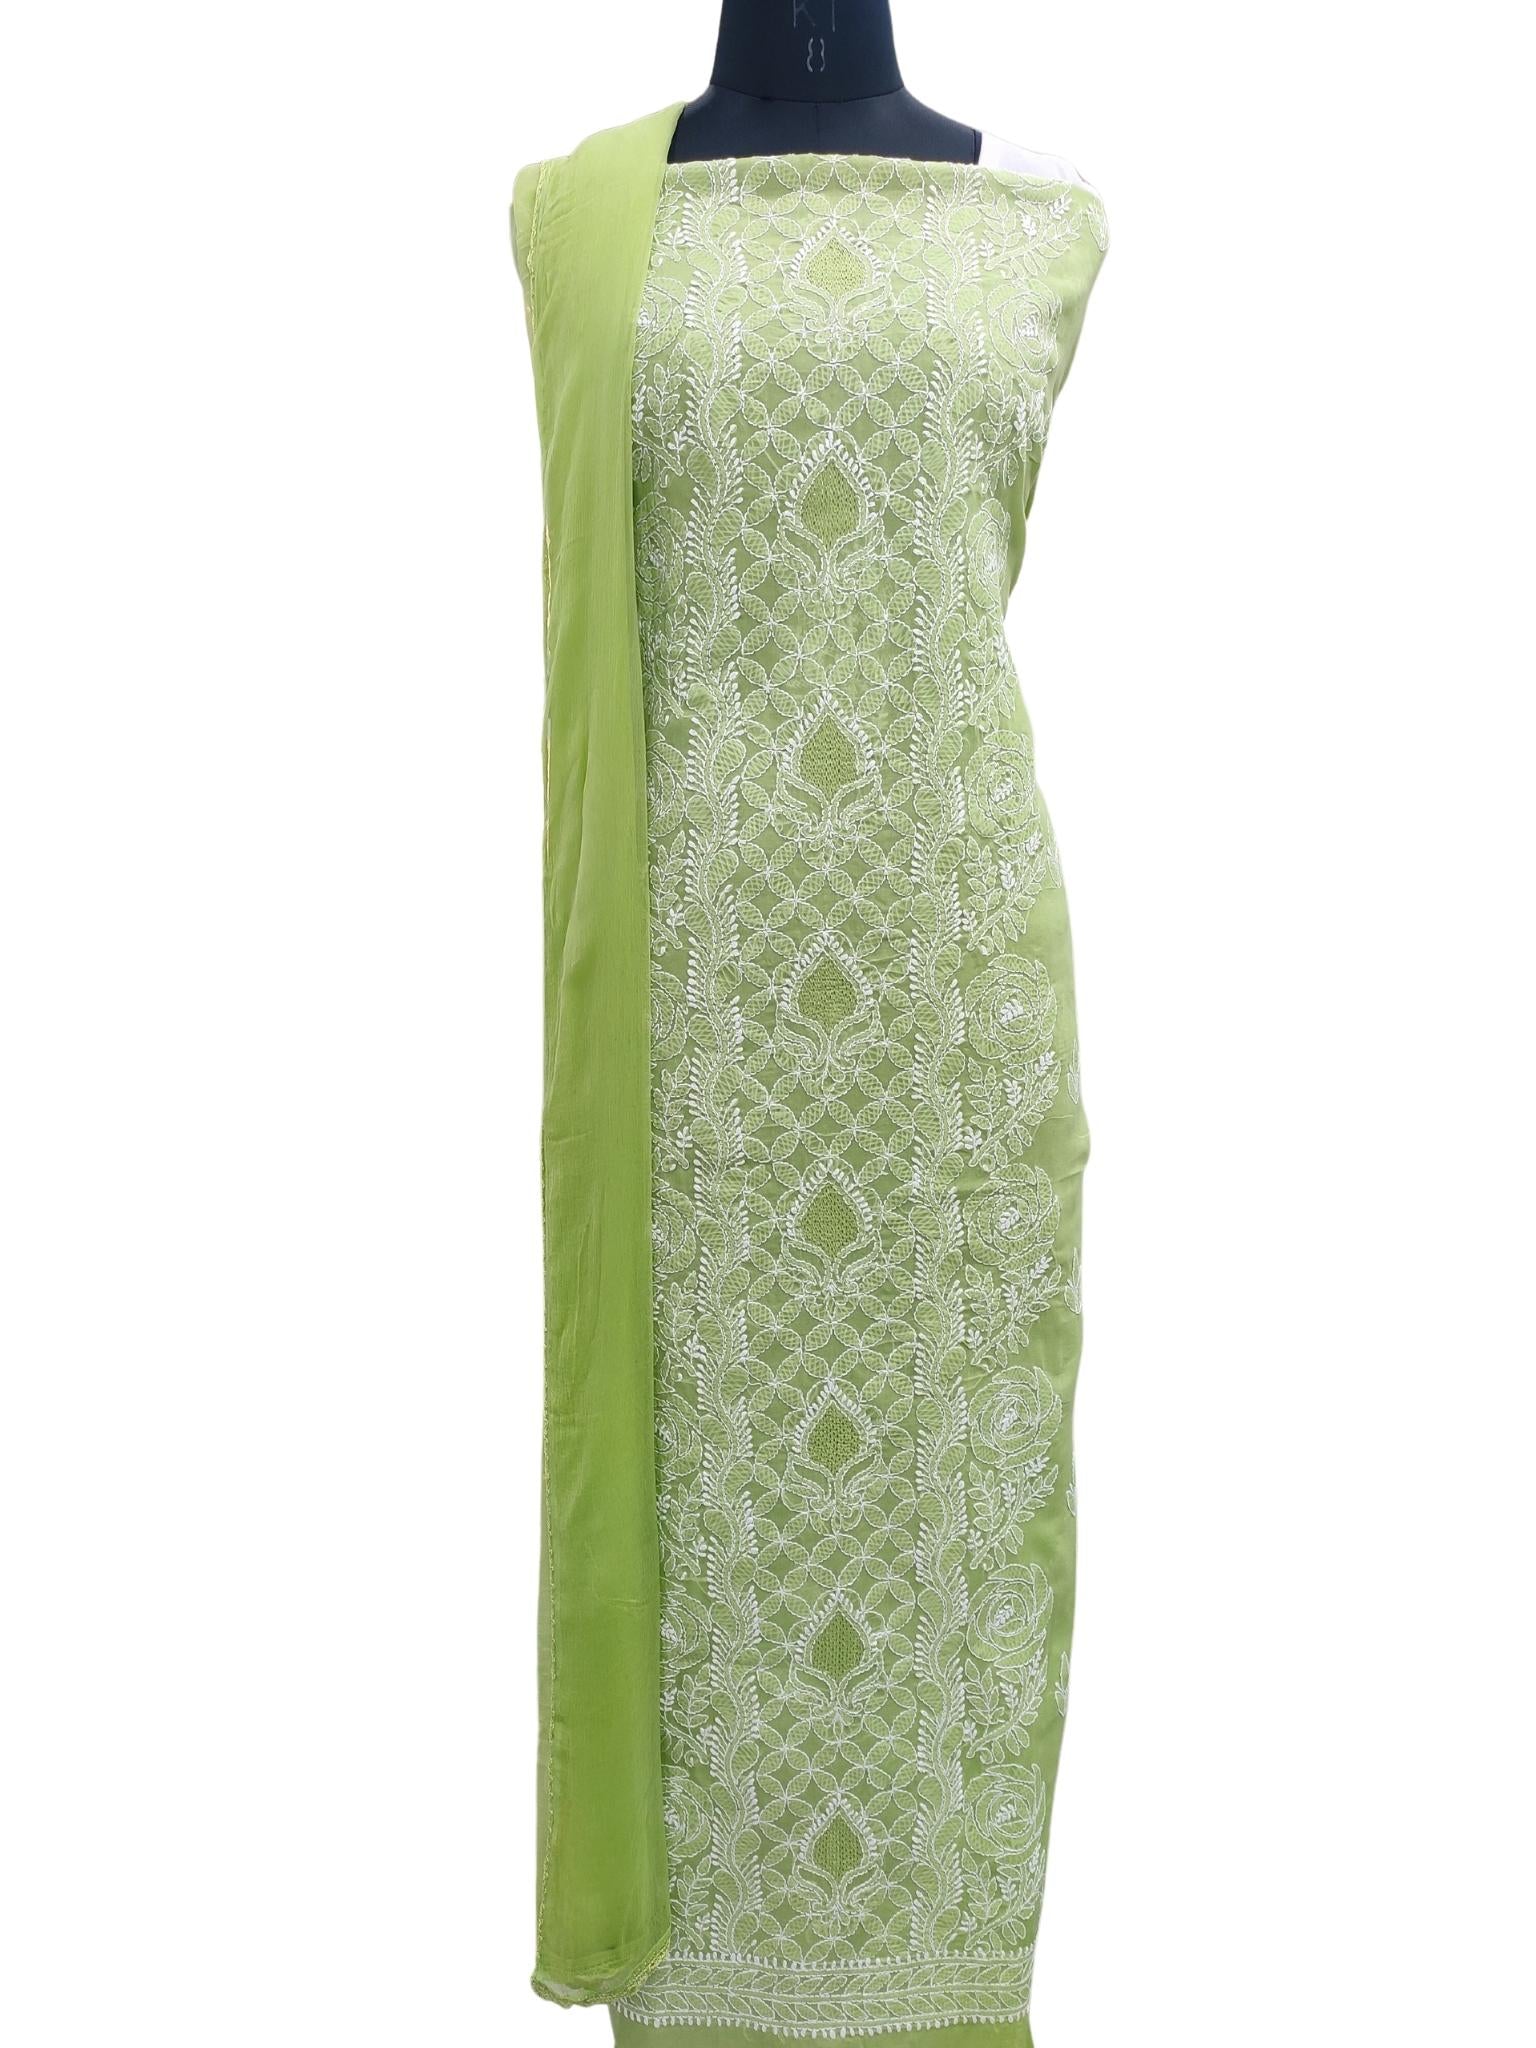 Shyamal Chikan Hand Embroidered Green Cotton Lucknowi Chikankari Unstitched Suit Piece with Jaali work- S18325